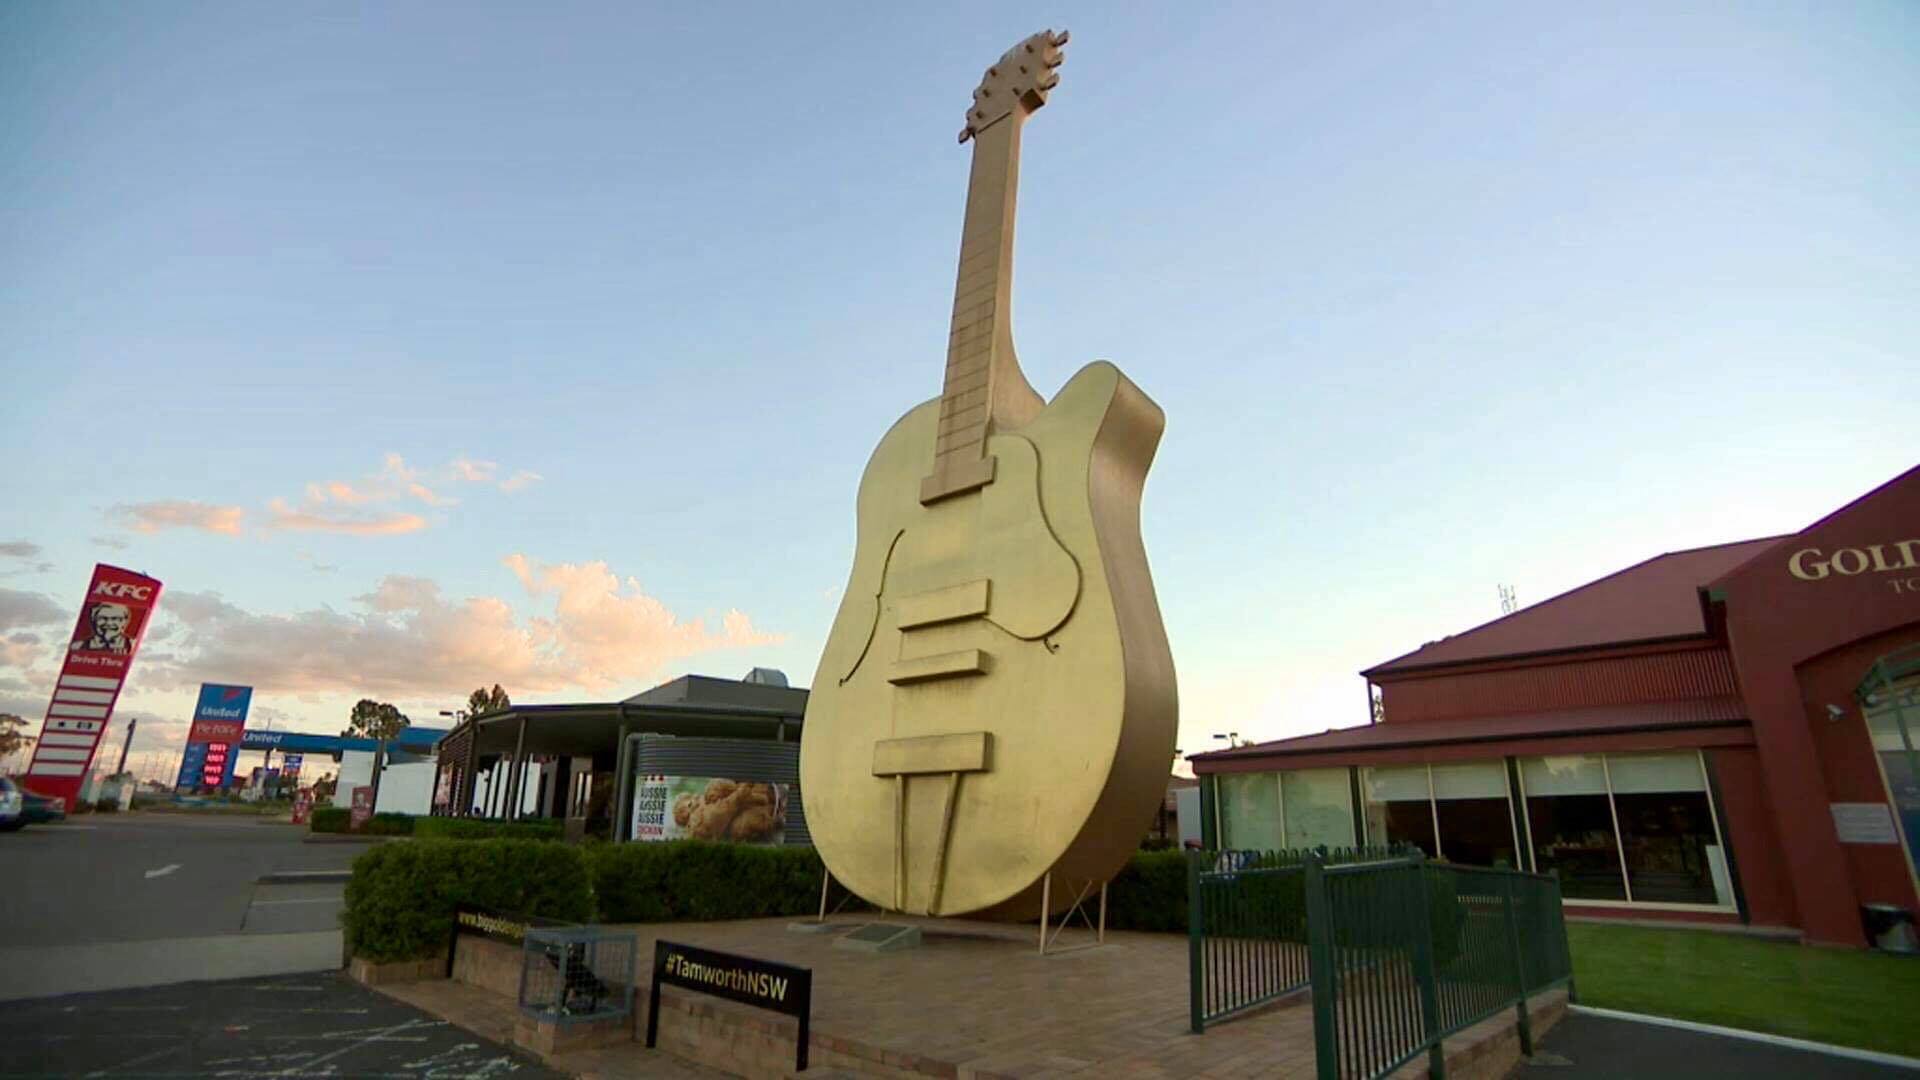 Tamworth, part of the New England electorate, is home to Australian country music and the Big Golden Guitar.